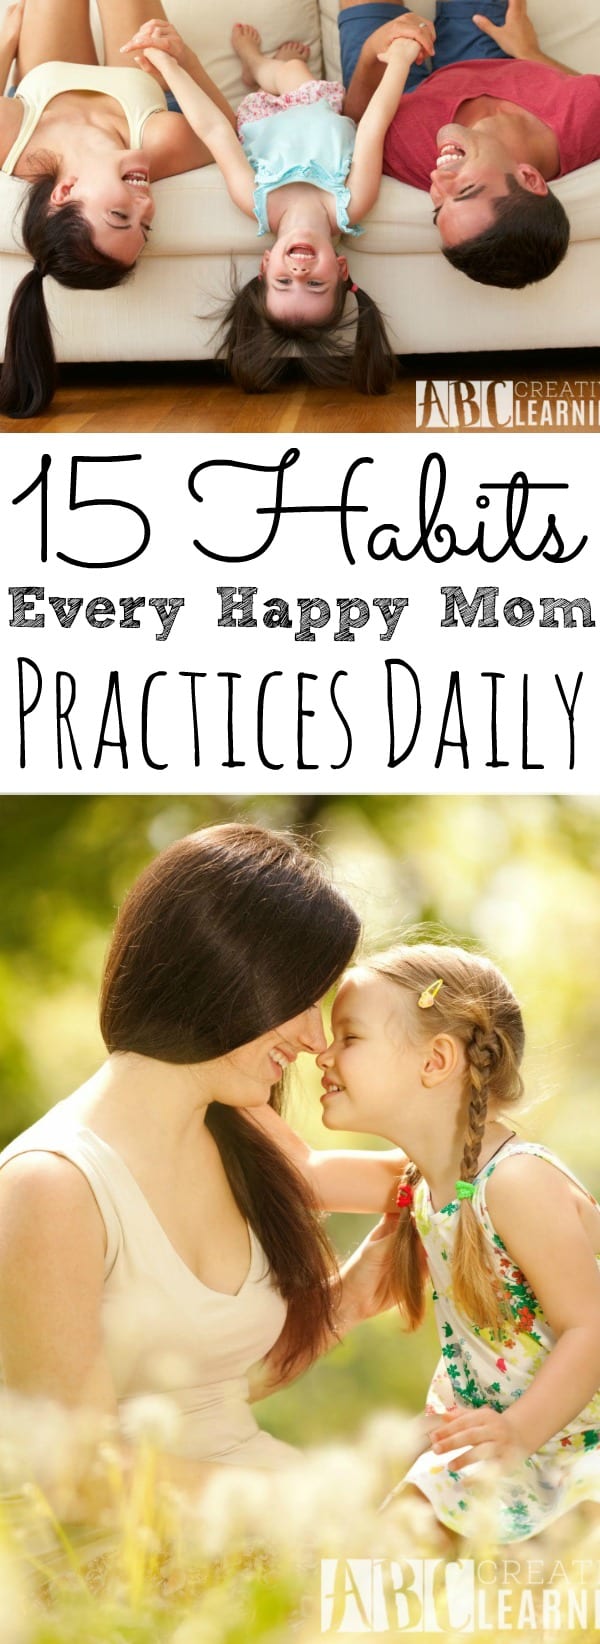 15 Habits Every Happy Mom Practices Daily - simplytodaylife.com